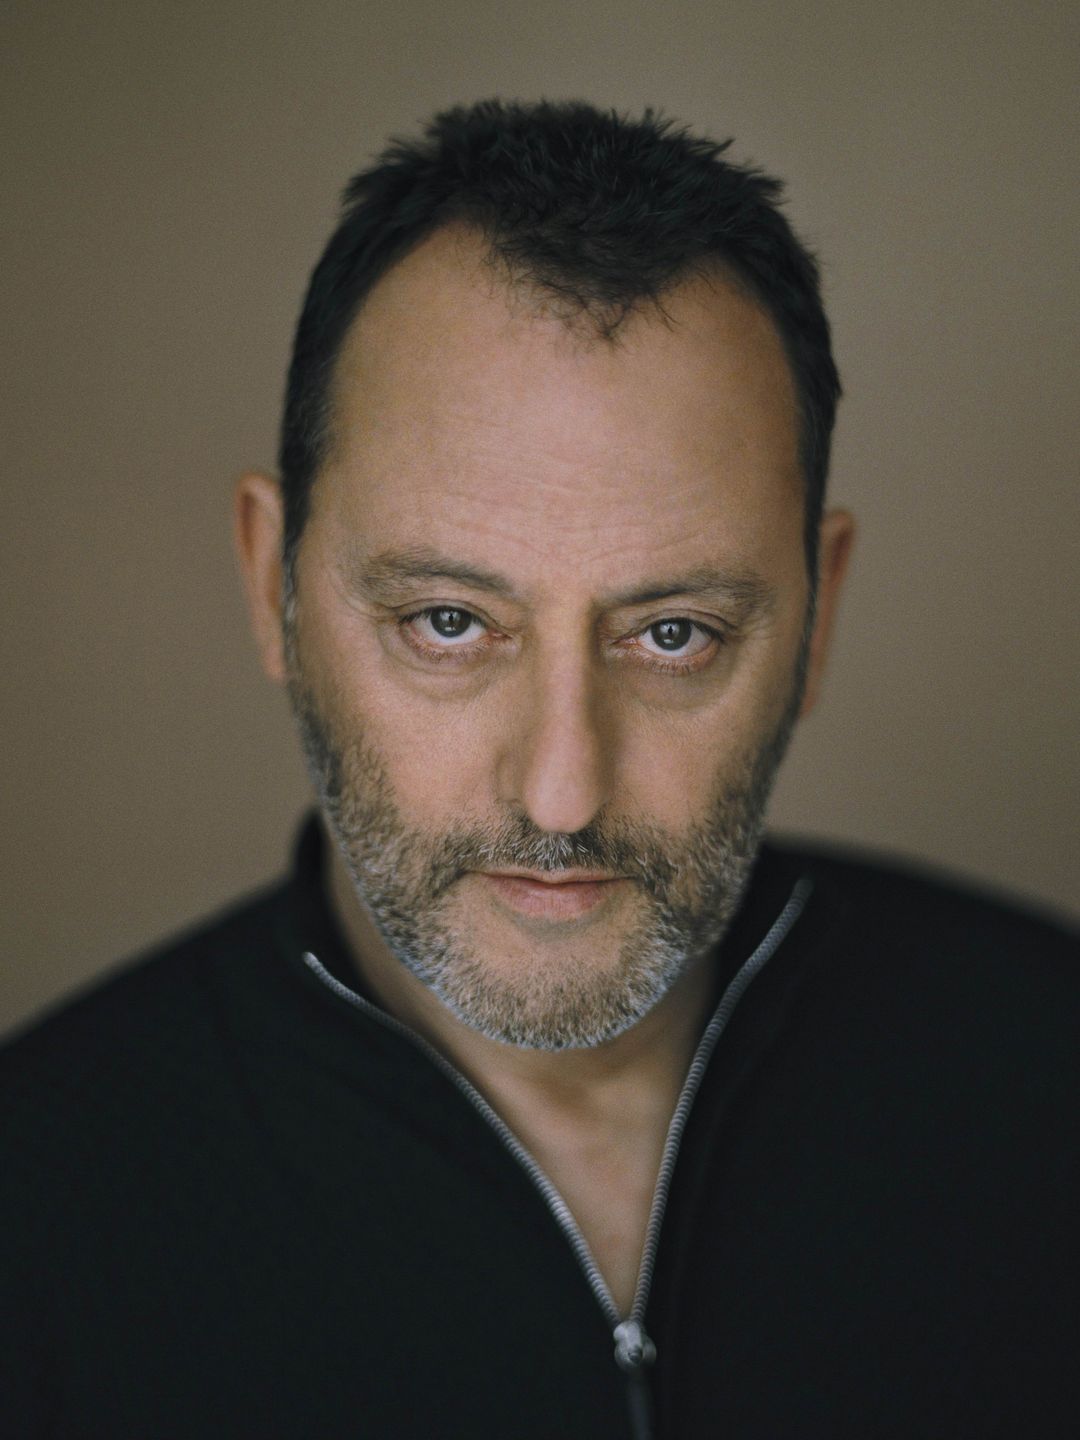 Jean Reno in real life